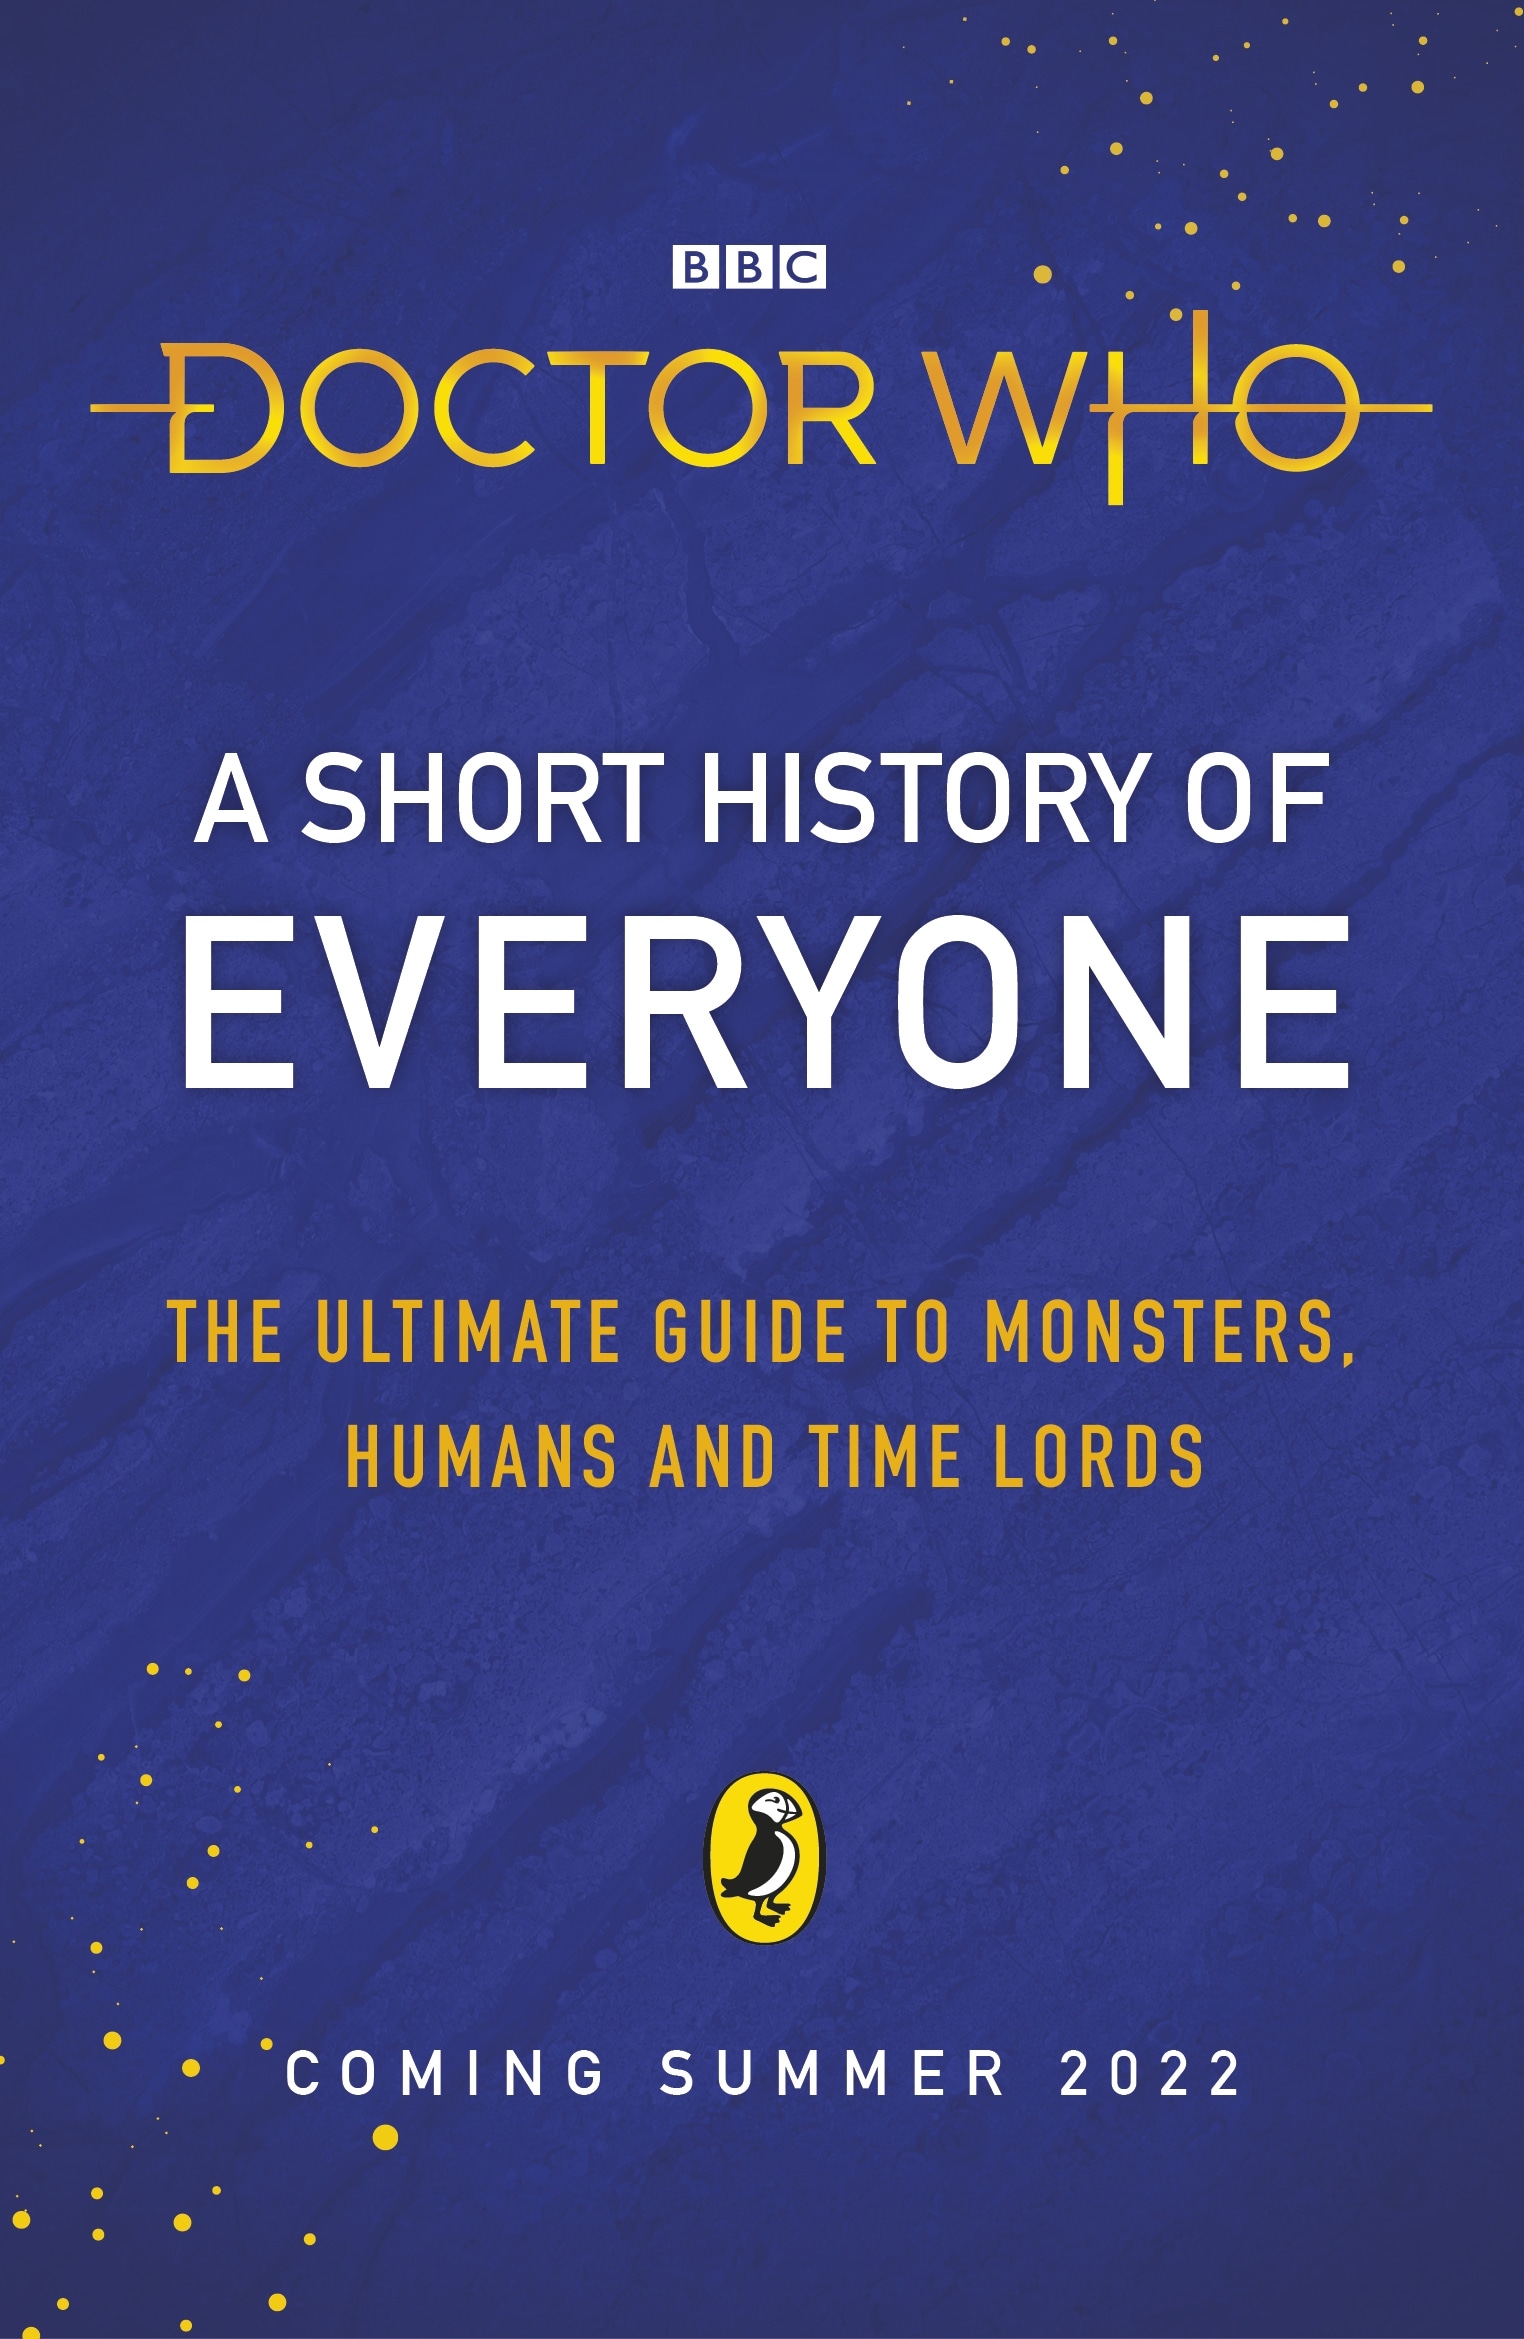 Book “Doctor Who: A Short History of Everyone” by Doctor Who — July 21, 2022